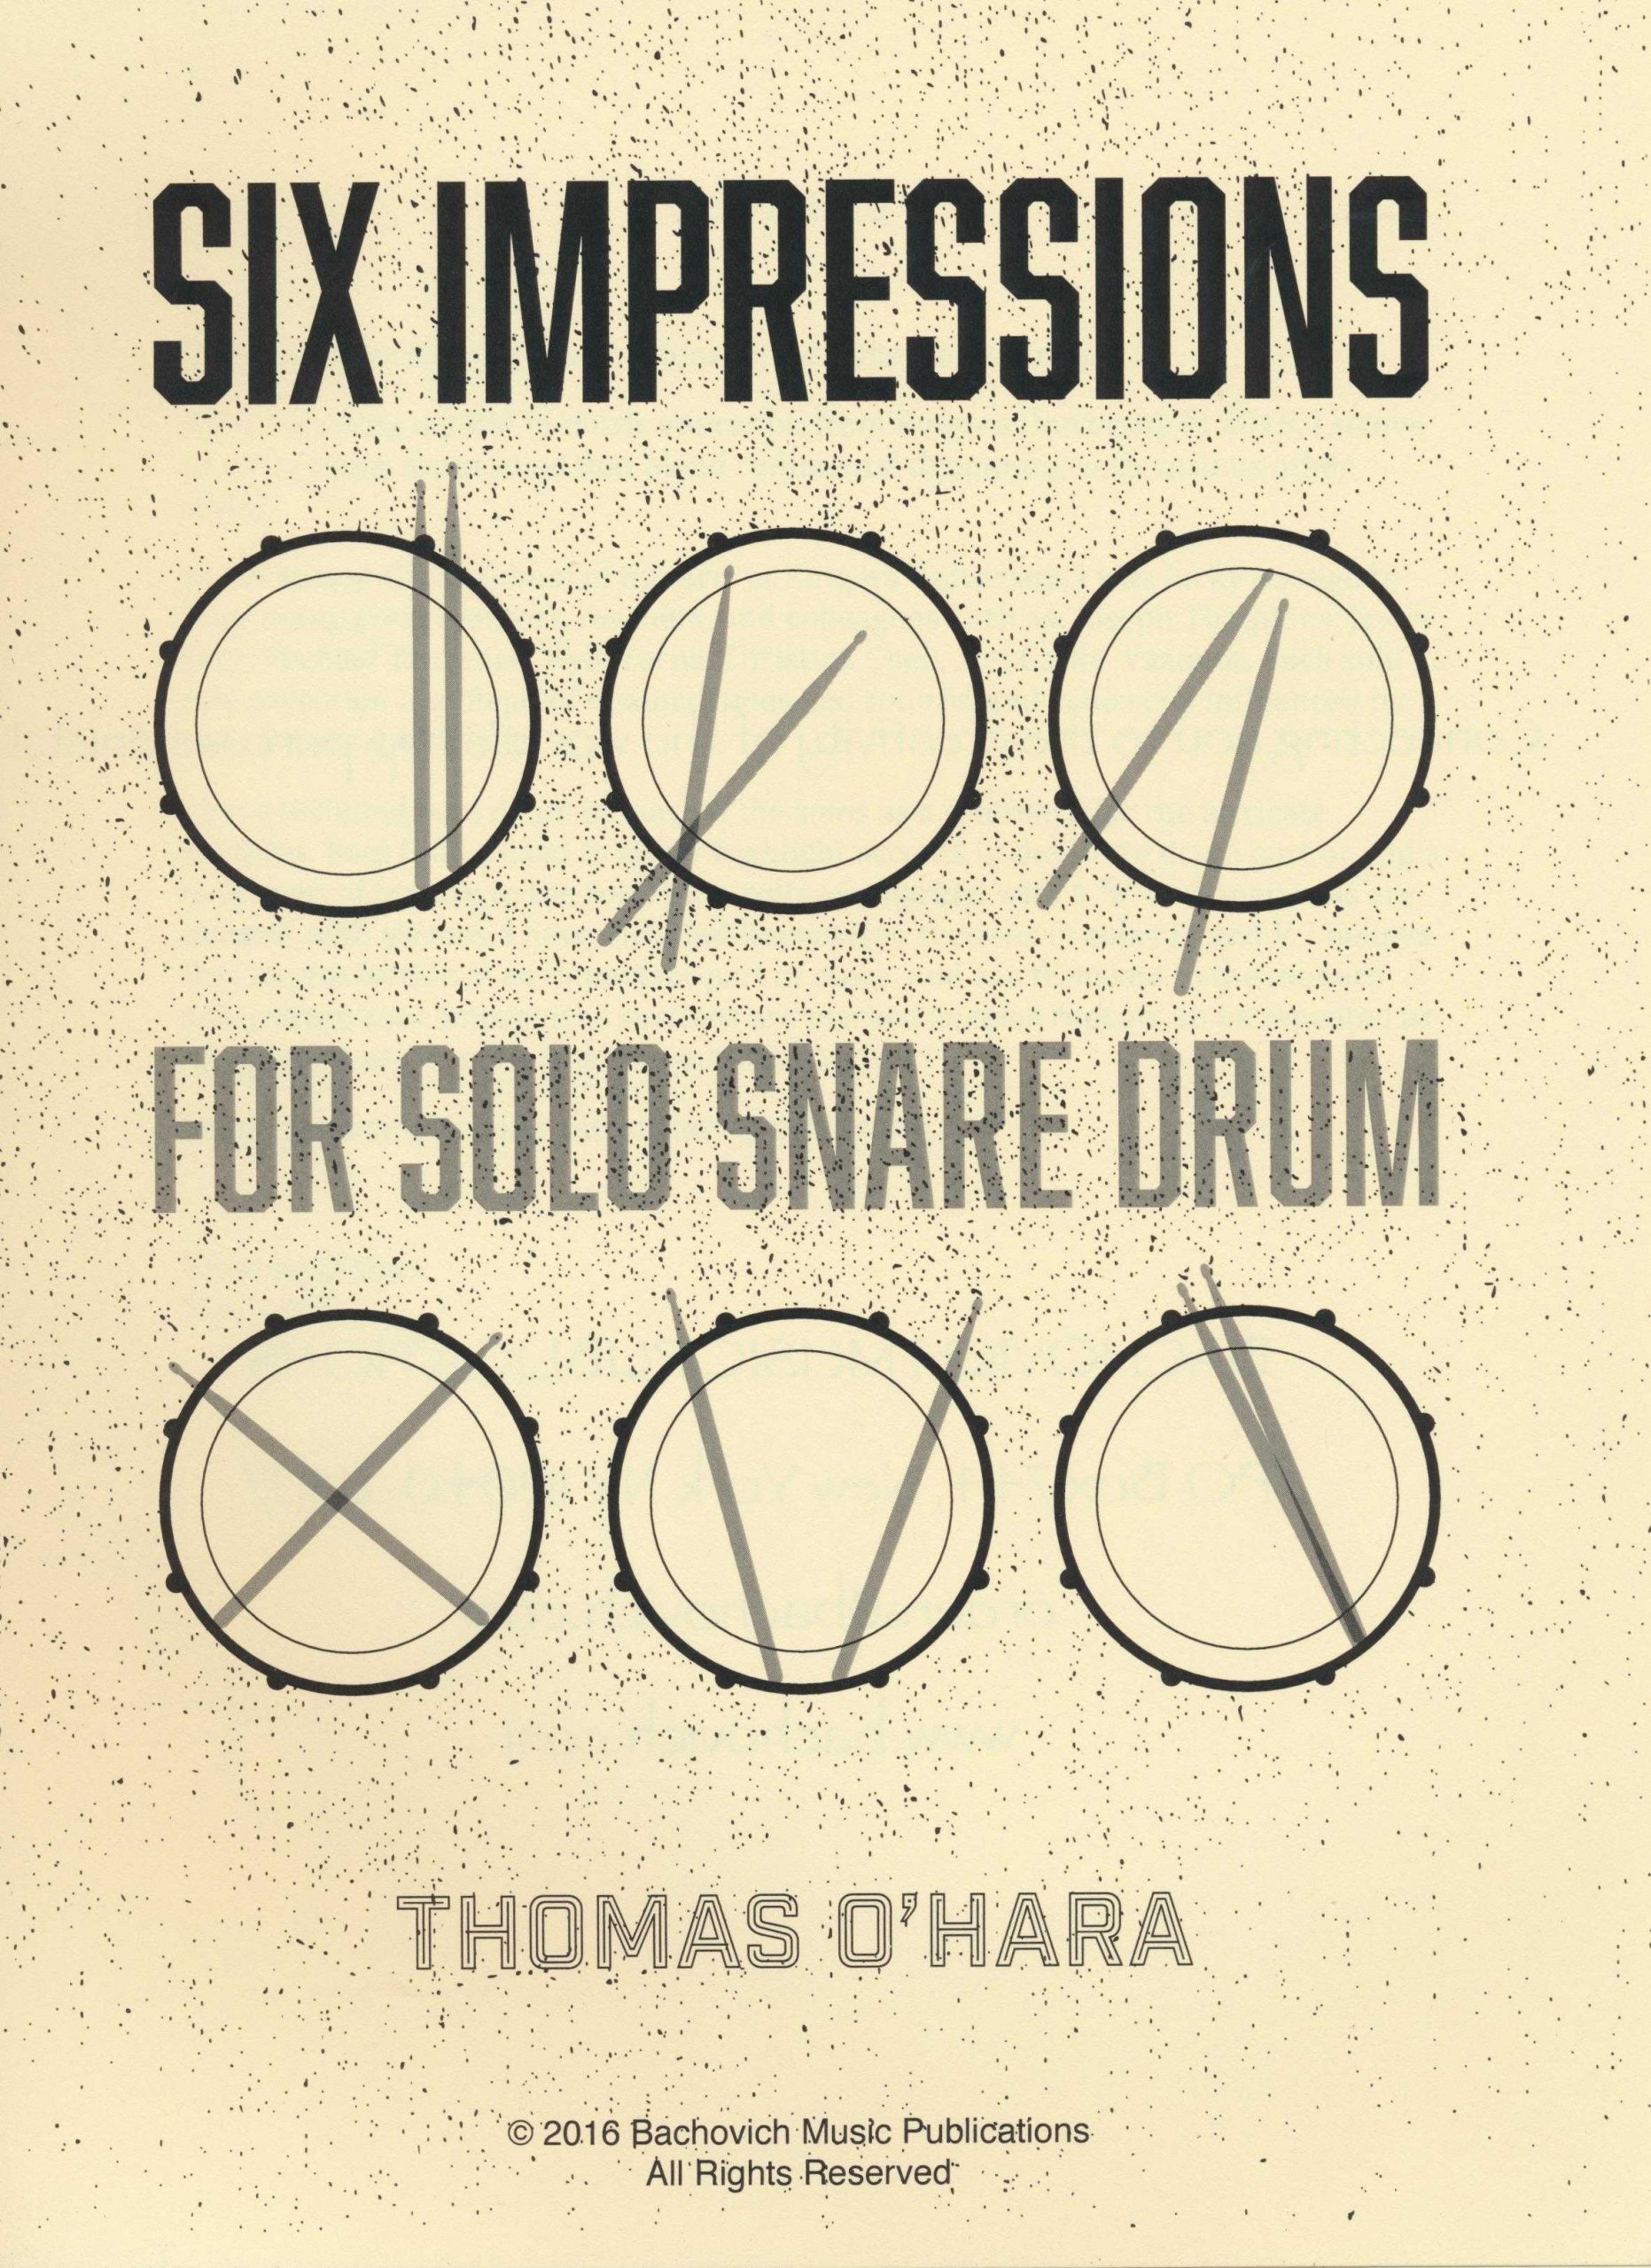 Six Impressions for solo snare drum by Thomas O'Hara